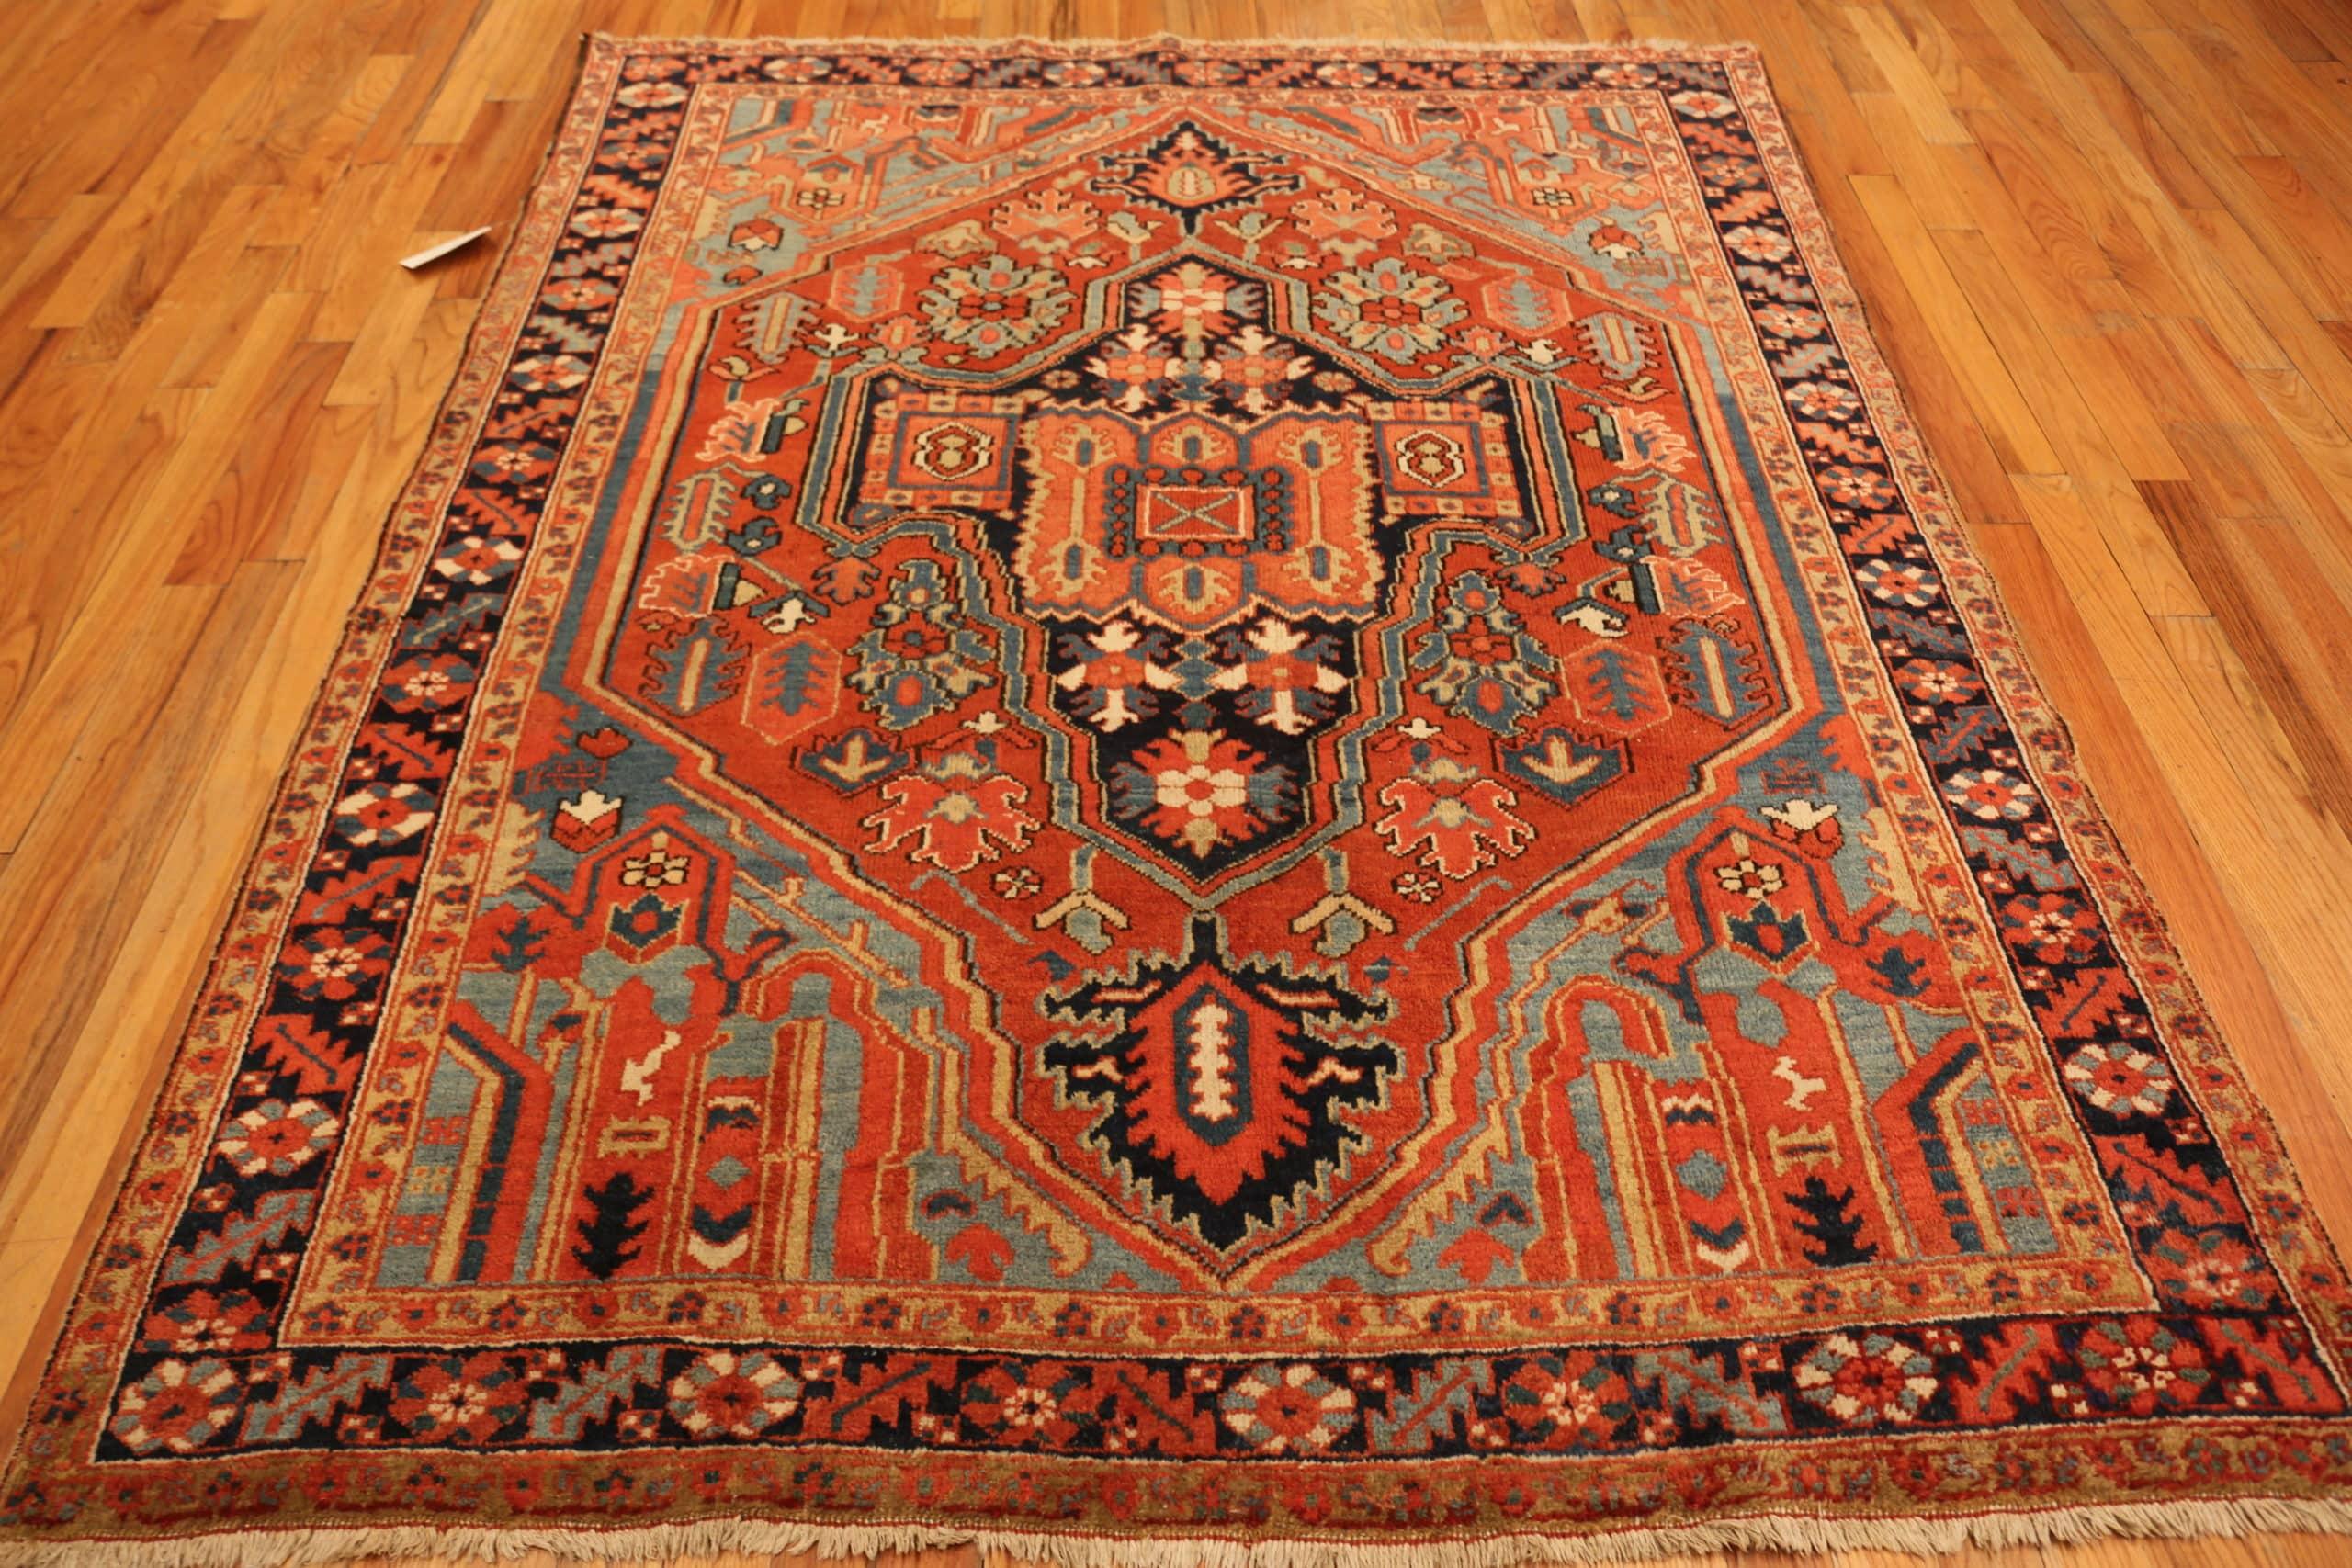 Small Antique Persian Heriz Rug. Size: 6 ft 5 in x 8 ft 2